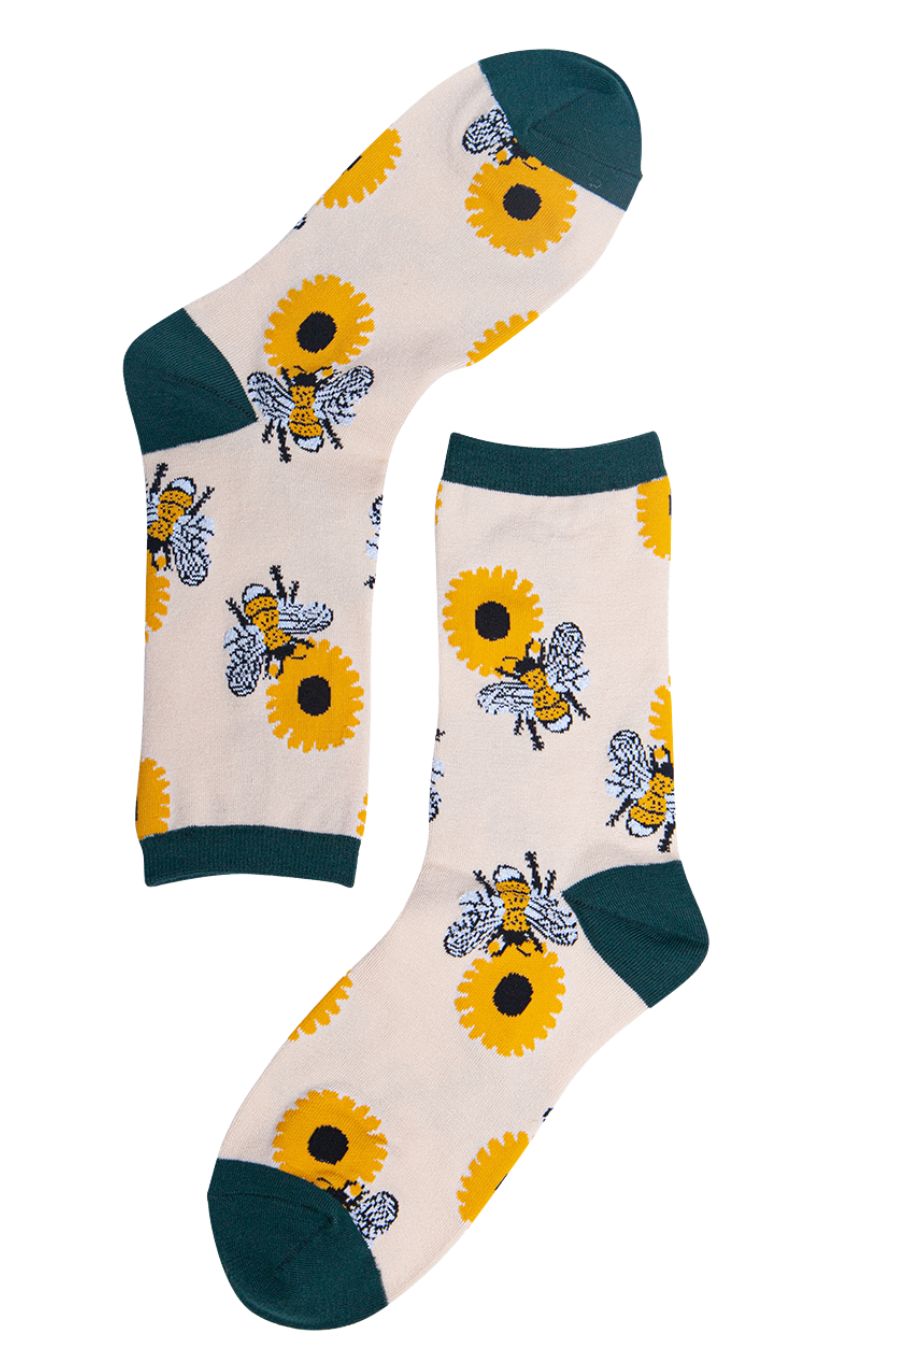 Womens Bamboo Bee Socks Bumblebees Sunflowers Floral Ankle Socks Green - Allison's Boutique